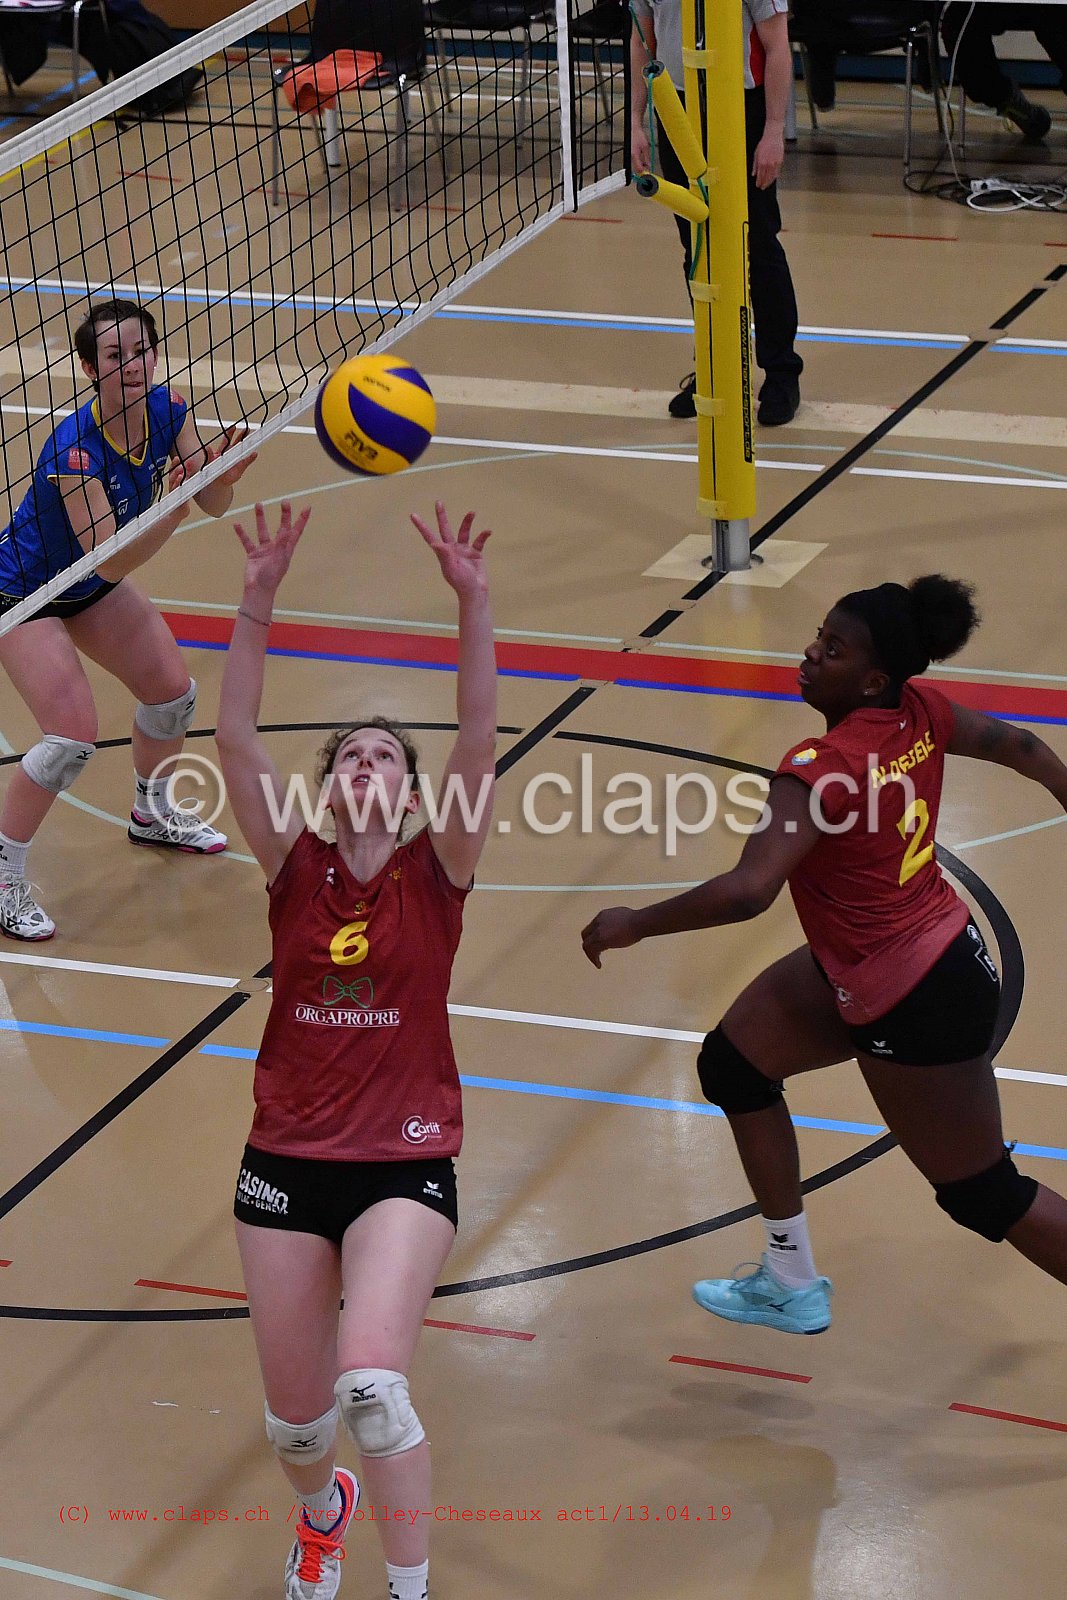 GeneveVolley - Cheseaux